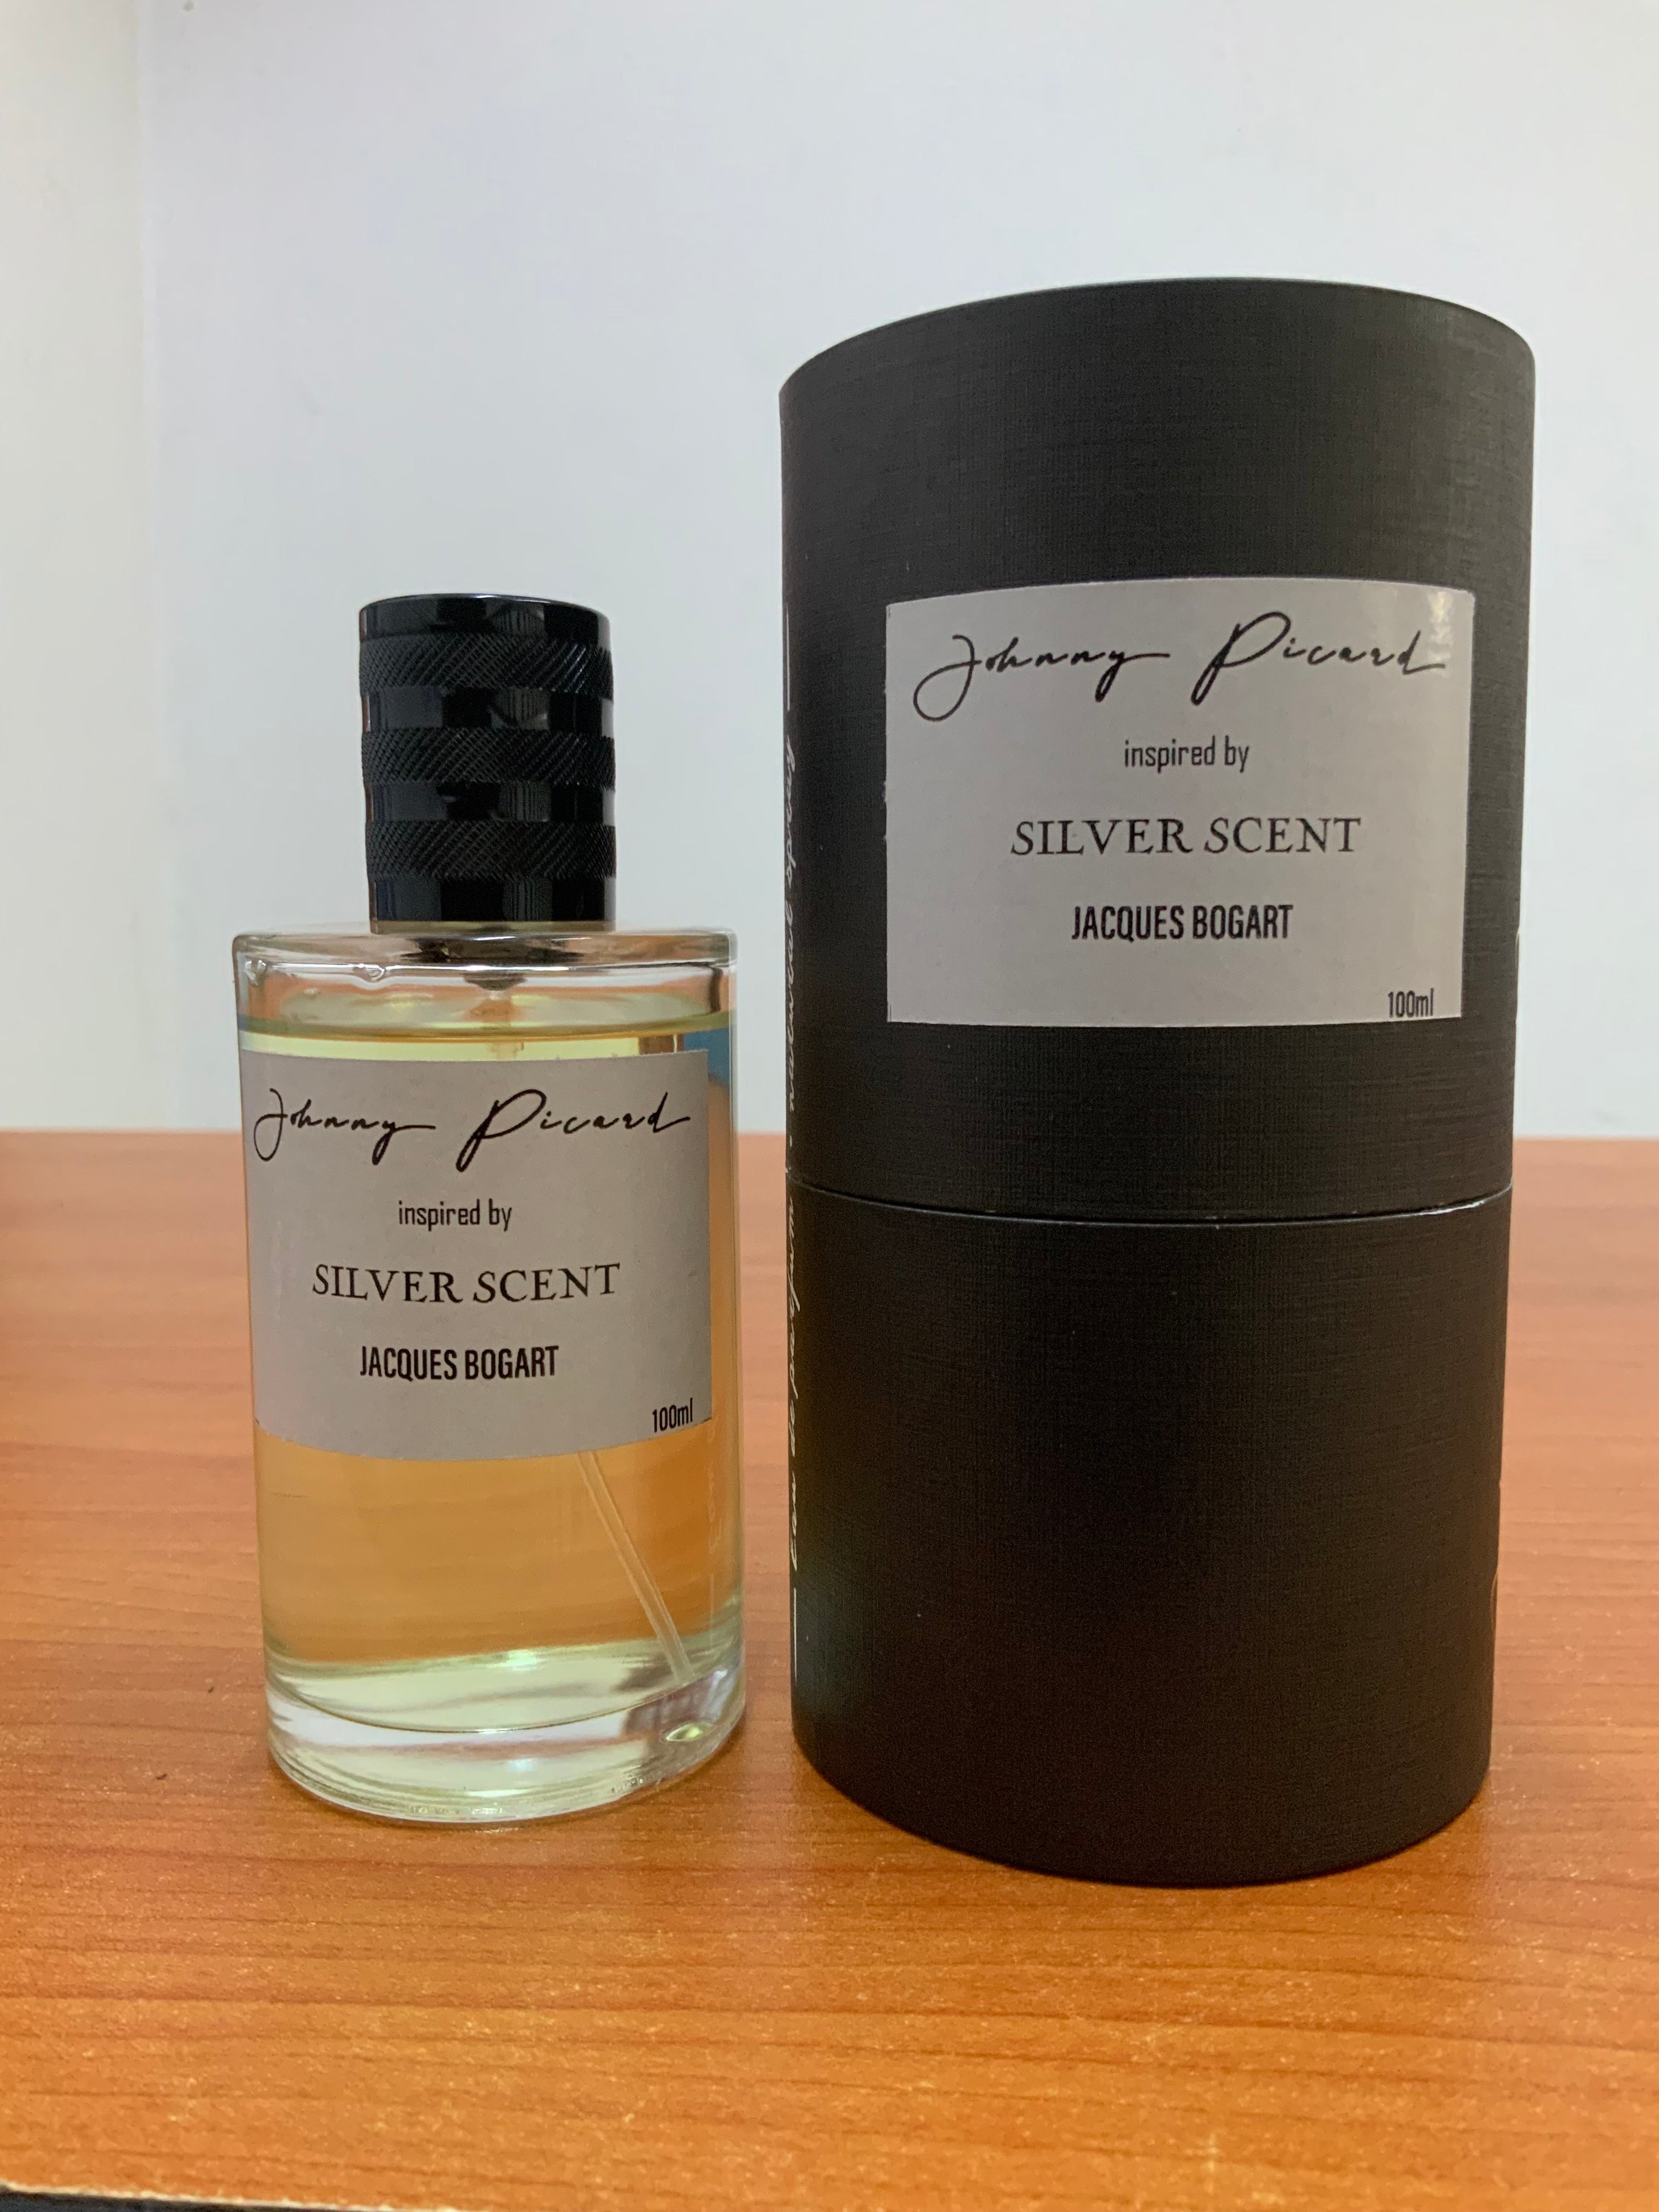 Johnny Picard inspired by Silver Scent   JACQUES BOGART